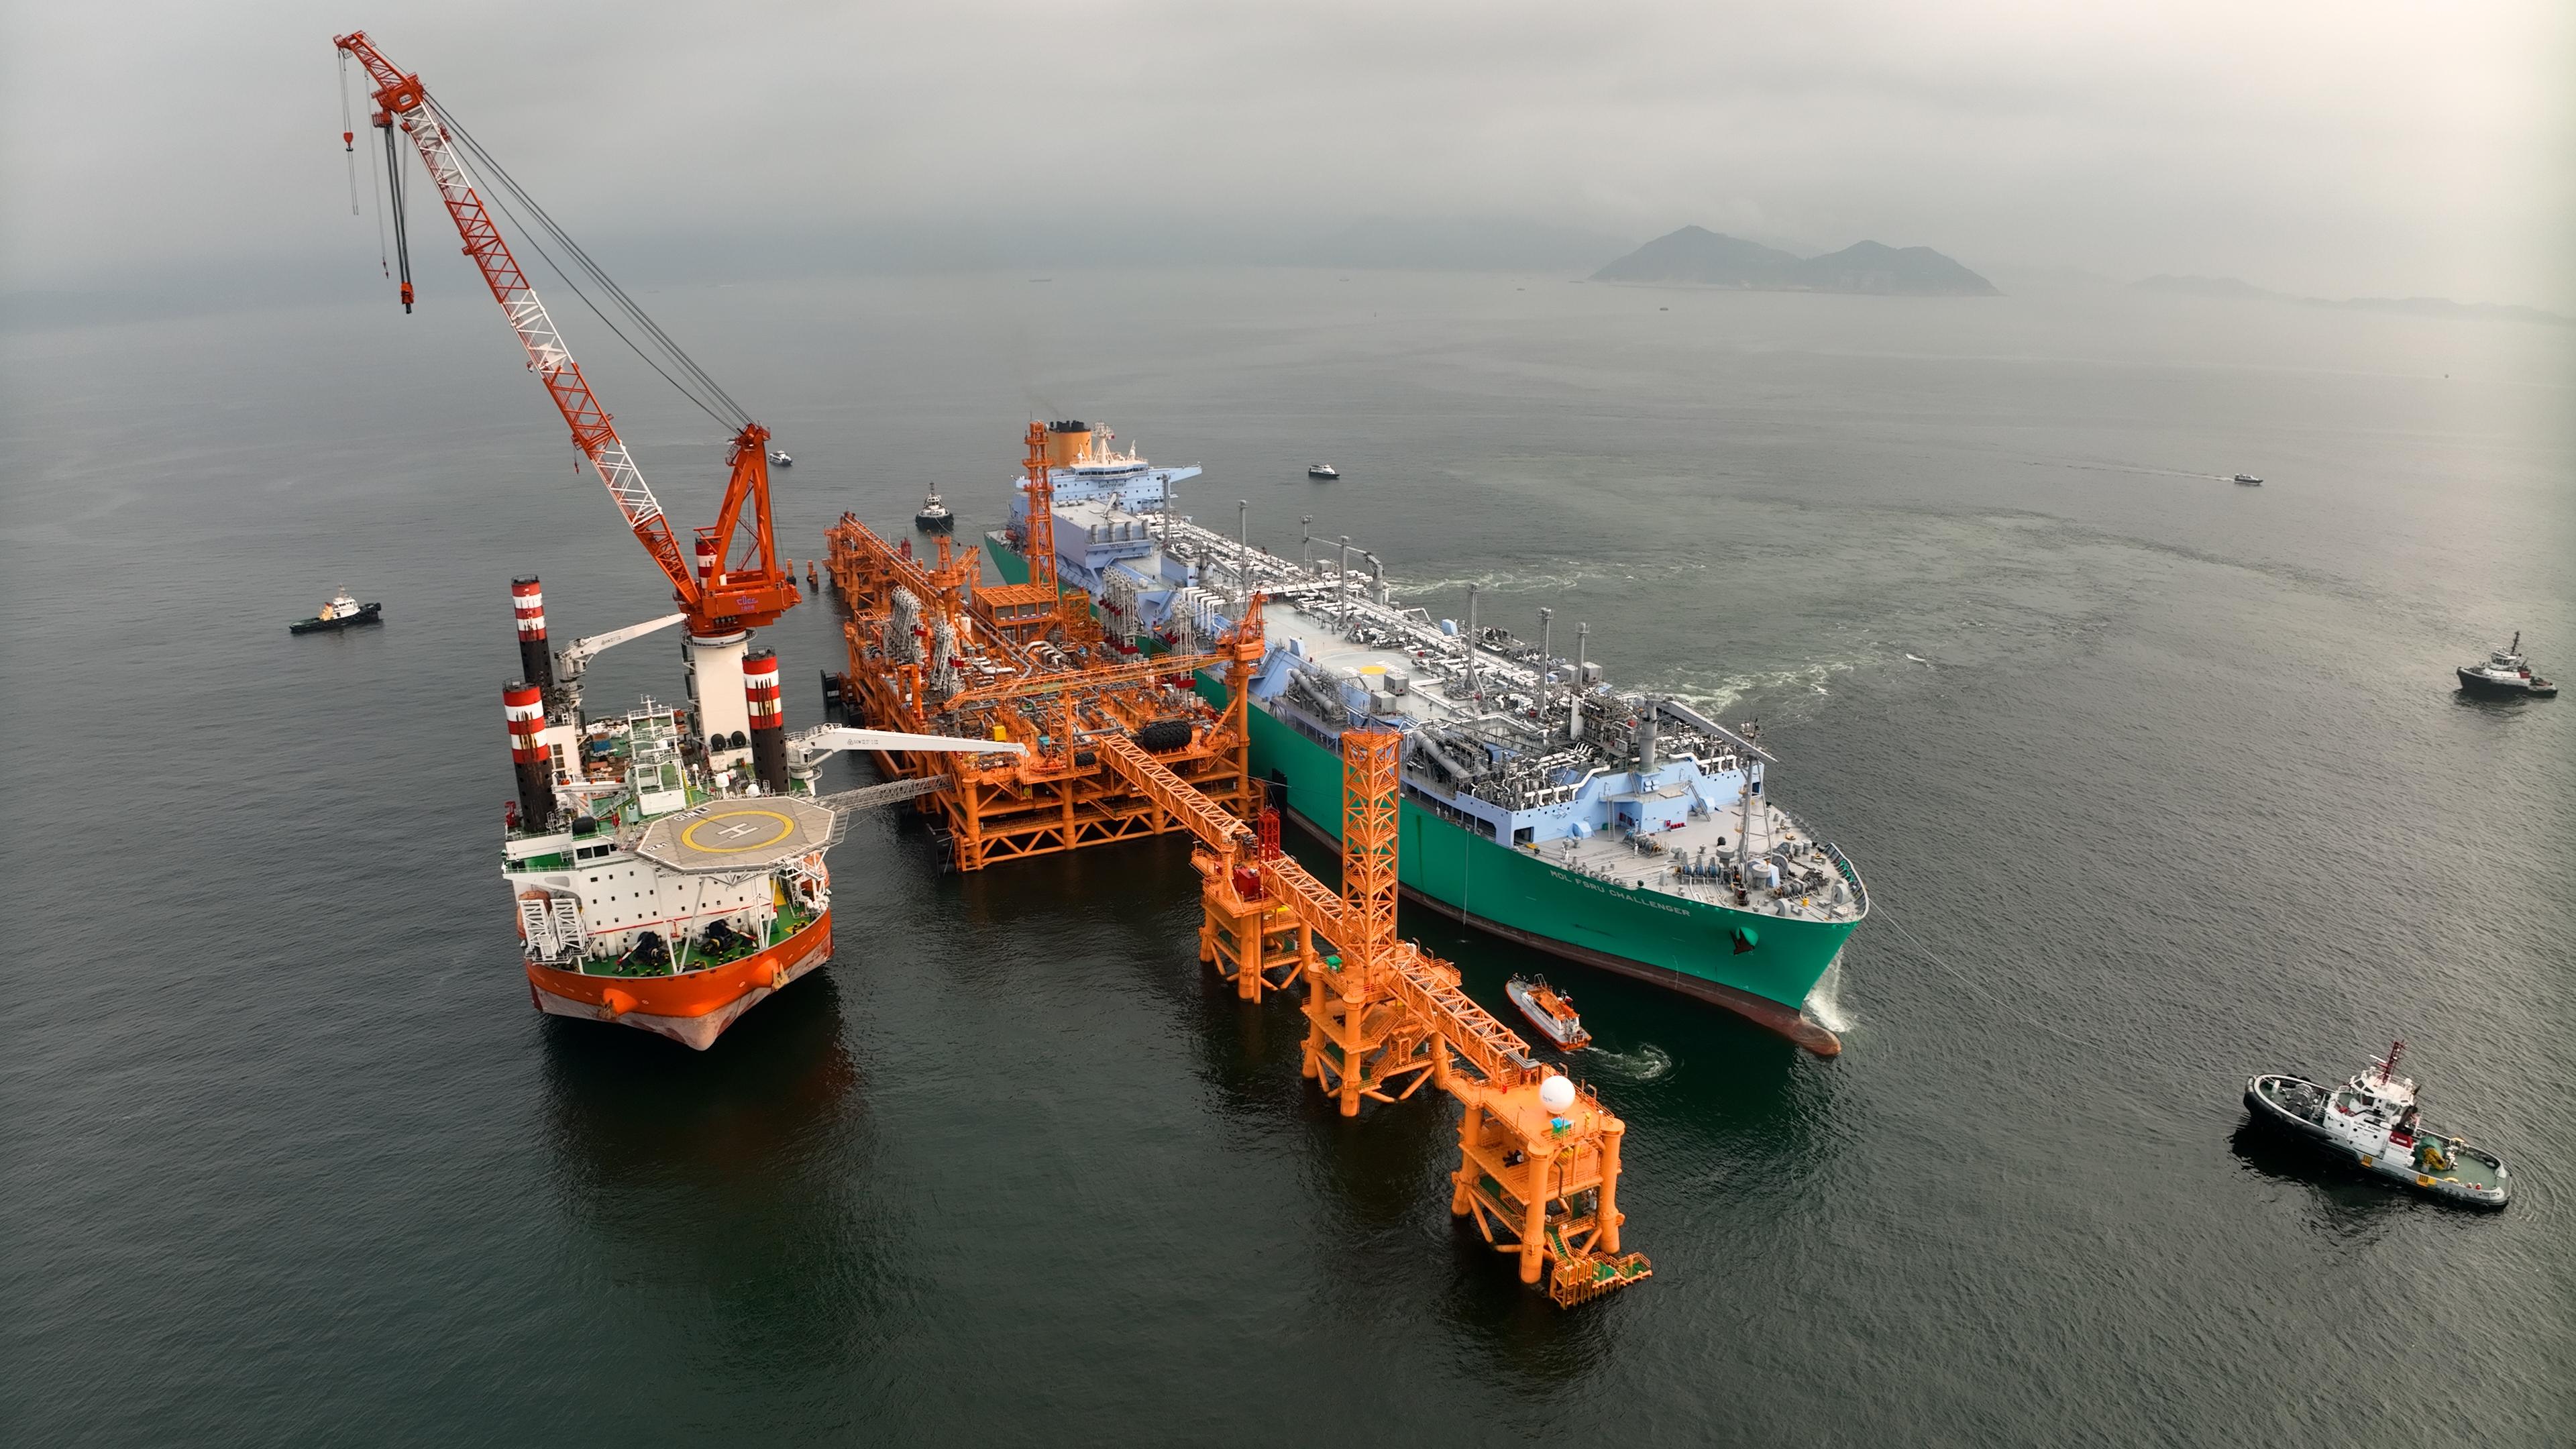 The Secretary for Environment and Ecology, Mr Tse Chin-wan, today (April 28) visited the offshore liquefied natural gas (LNG) terminal and the floating storage and regasification unit  vessel in the south-western waters of Hong Kong. Photo shows the offshore LNG terminal in the south-western waters of Hong Kong.